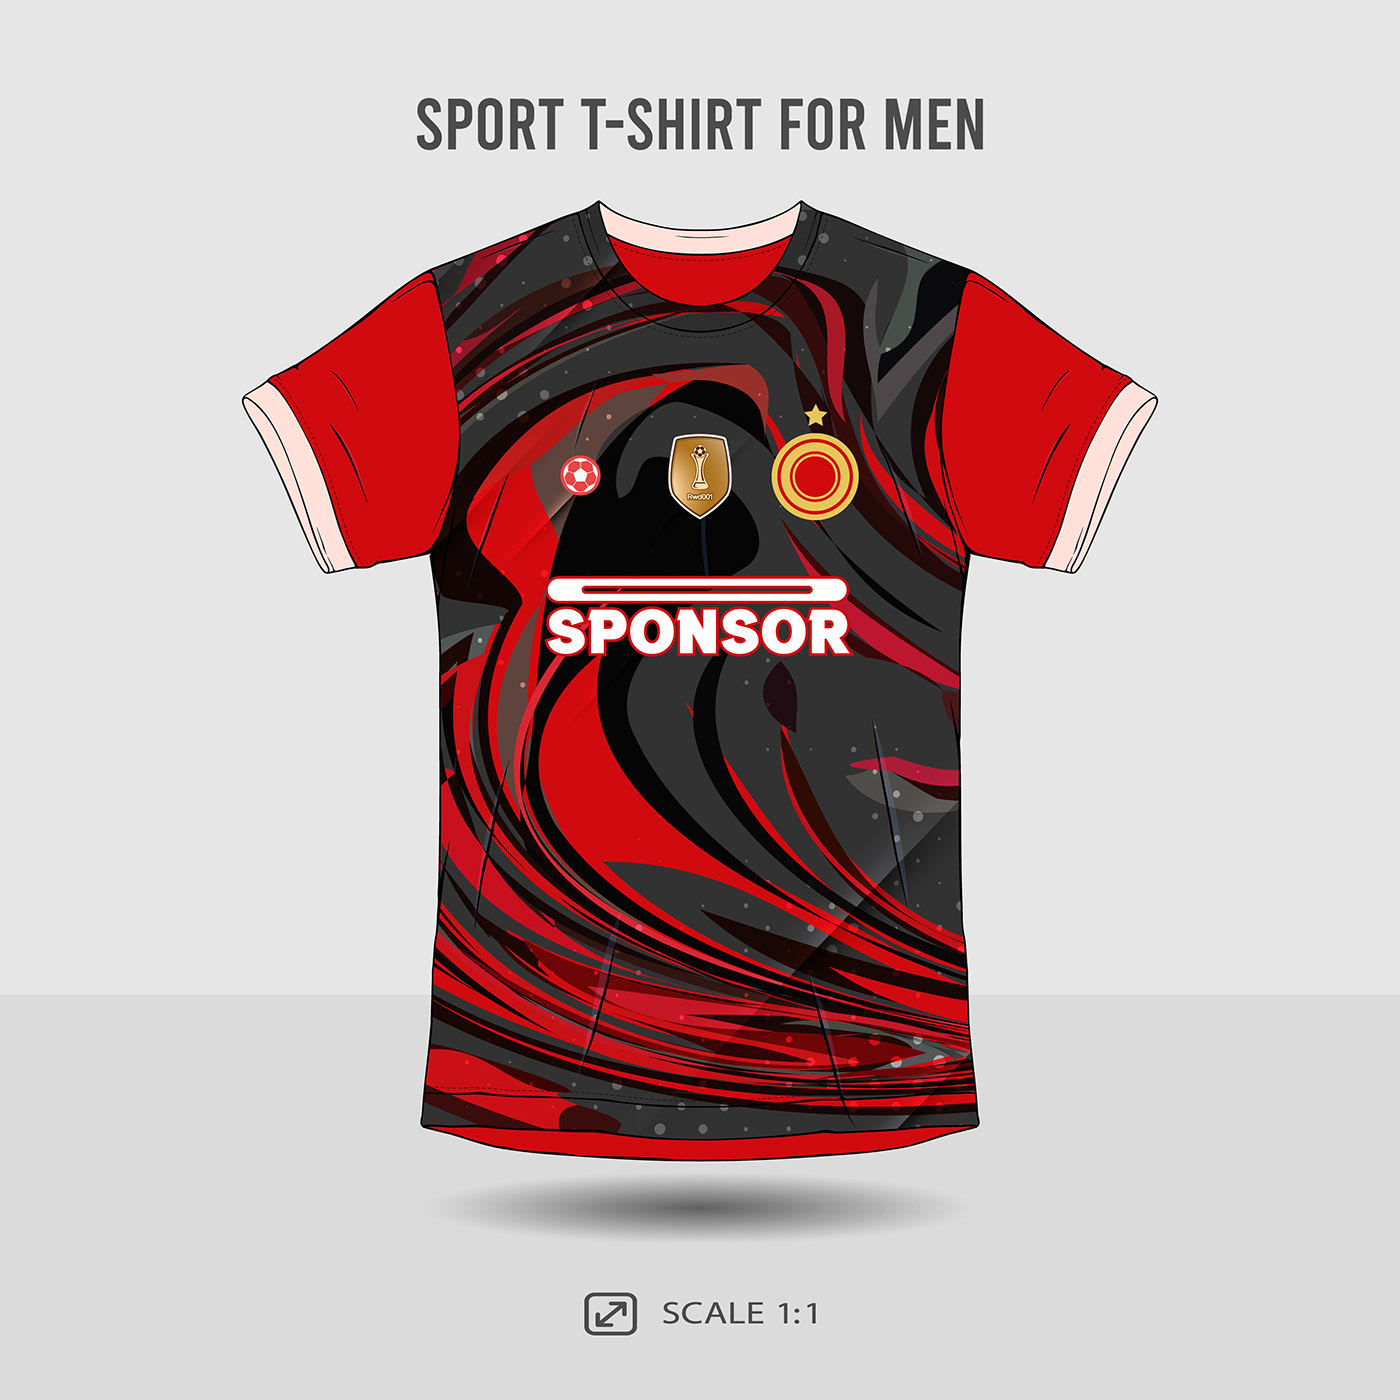 red jersey, black jersey, jersey, sublimation jersey, soccer jersey, blue jersey, jersey design, soc